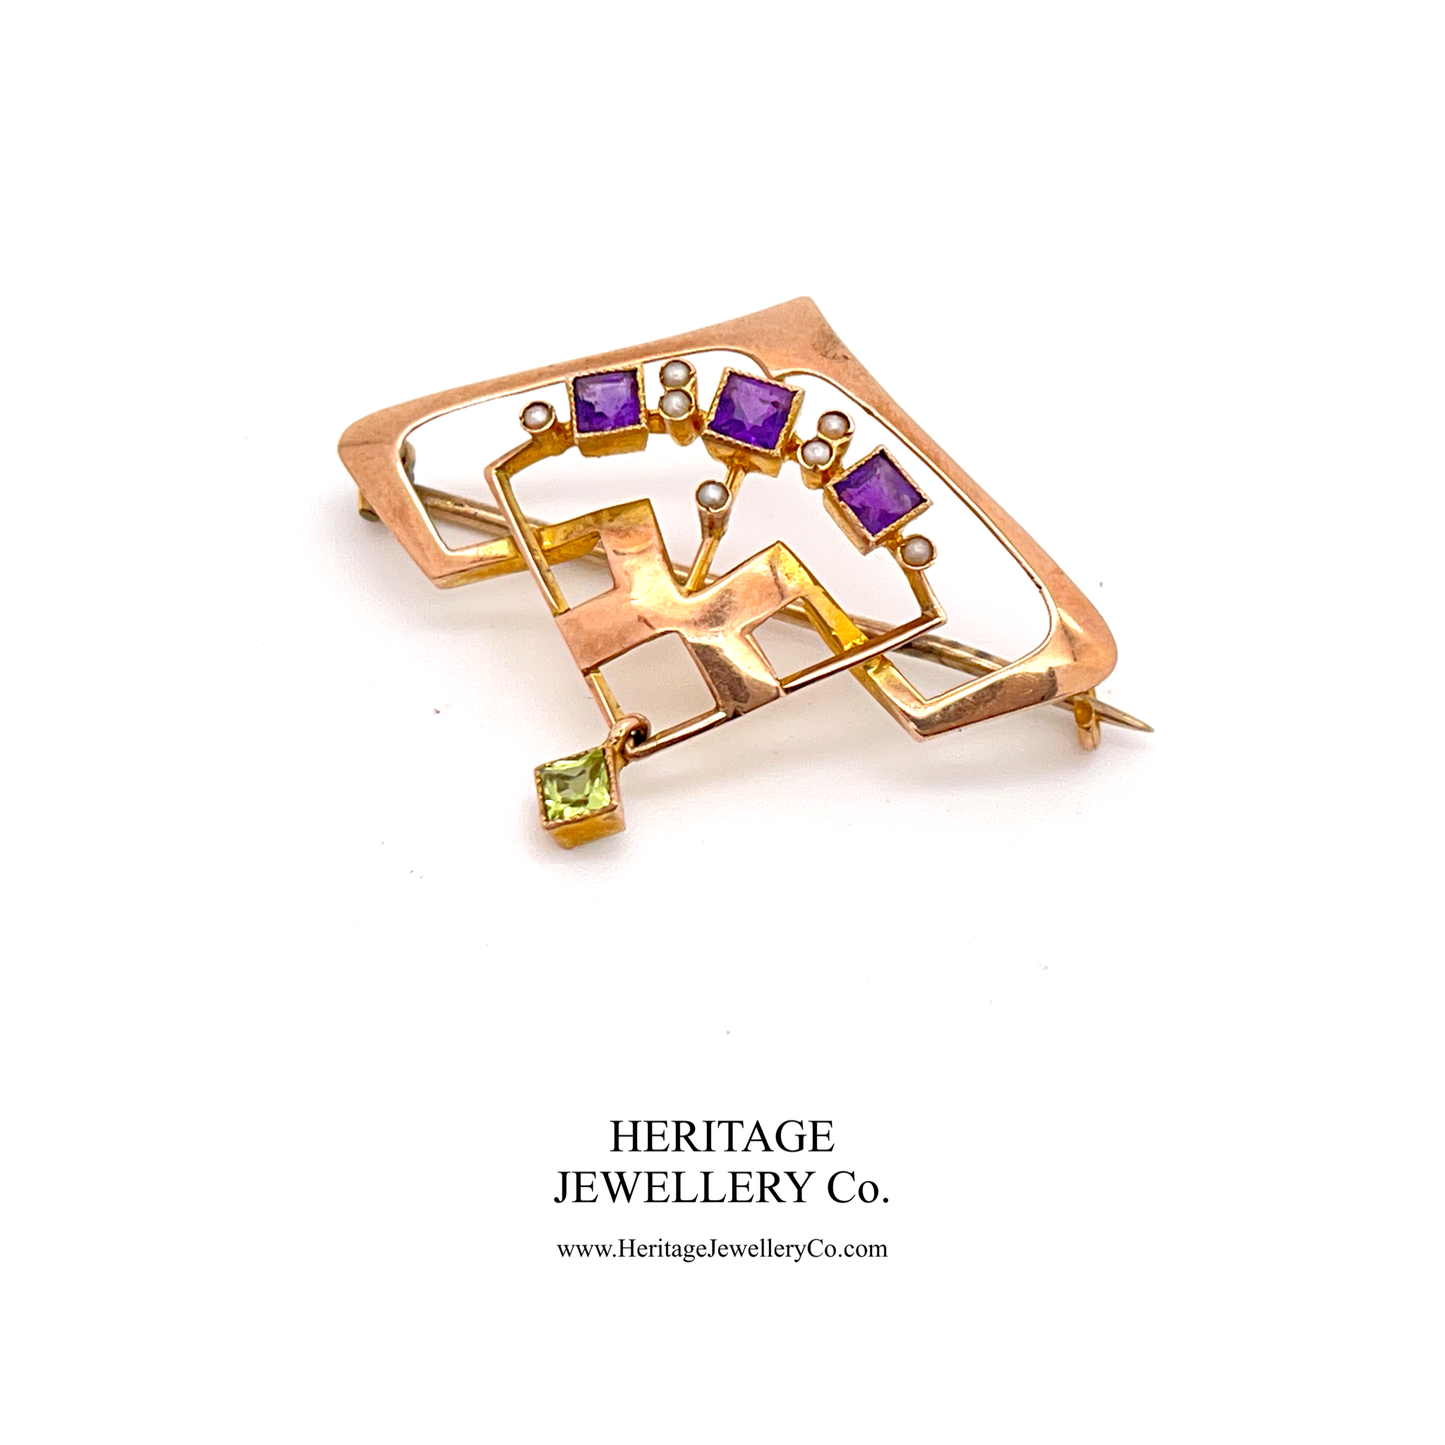 Antique Suffragette Brooch with Amethyst, Pearl and Peridot